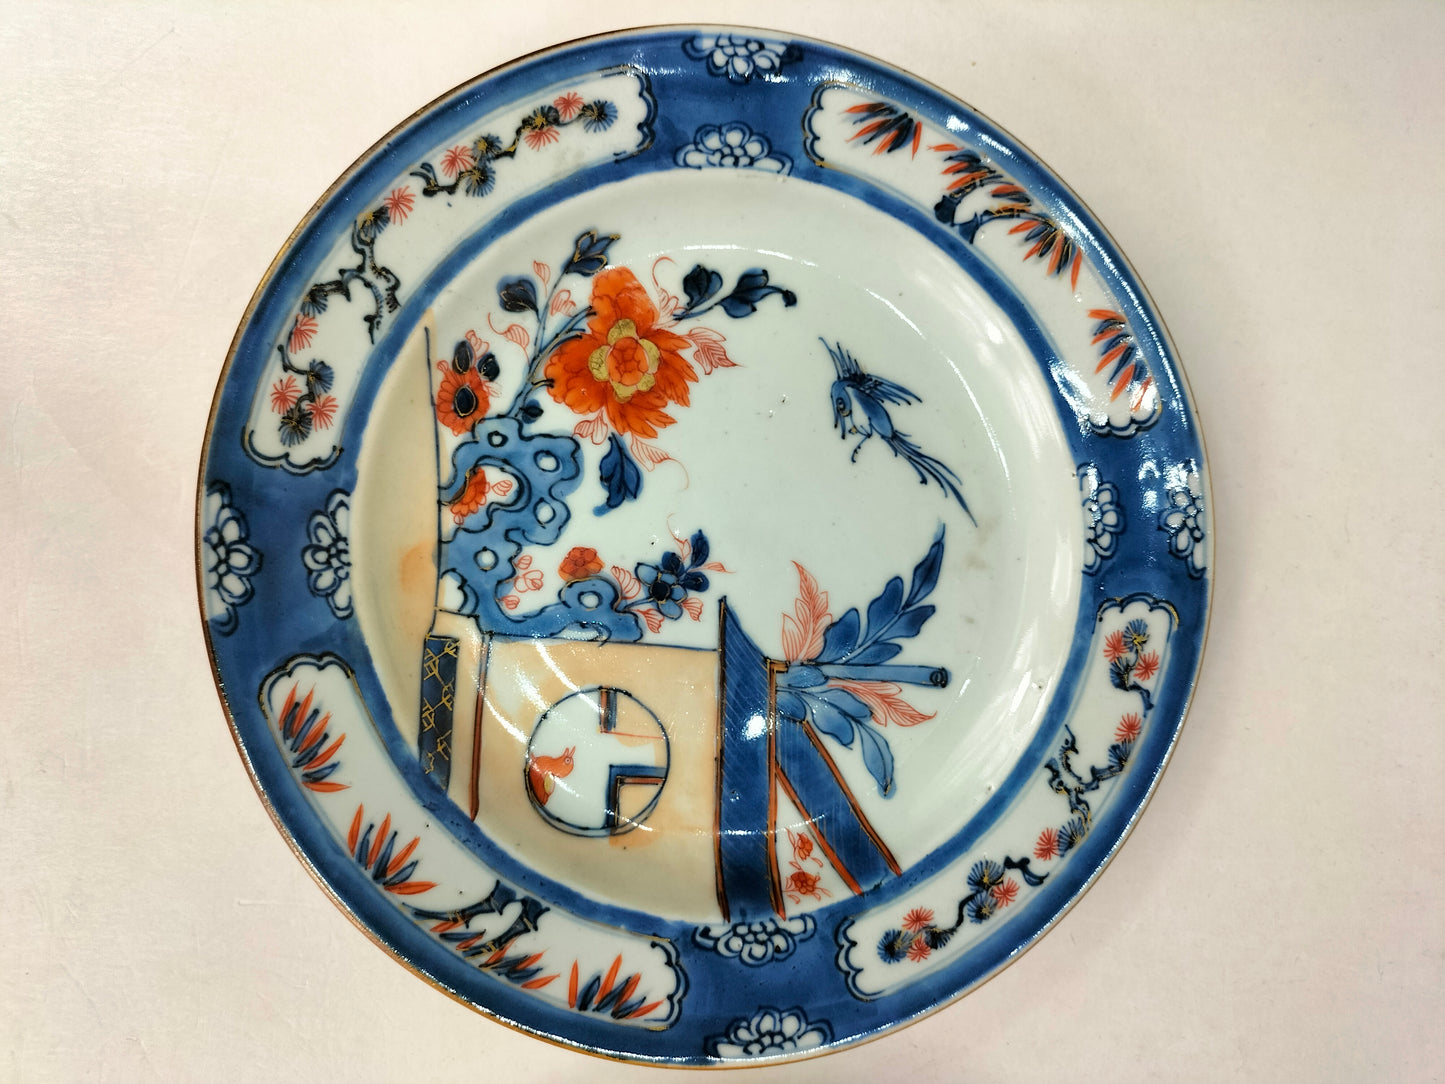 Pair of antique Chinese imari plates with a garden scene // Qing Dynasty - 18th century - Kangxi